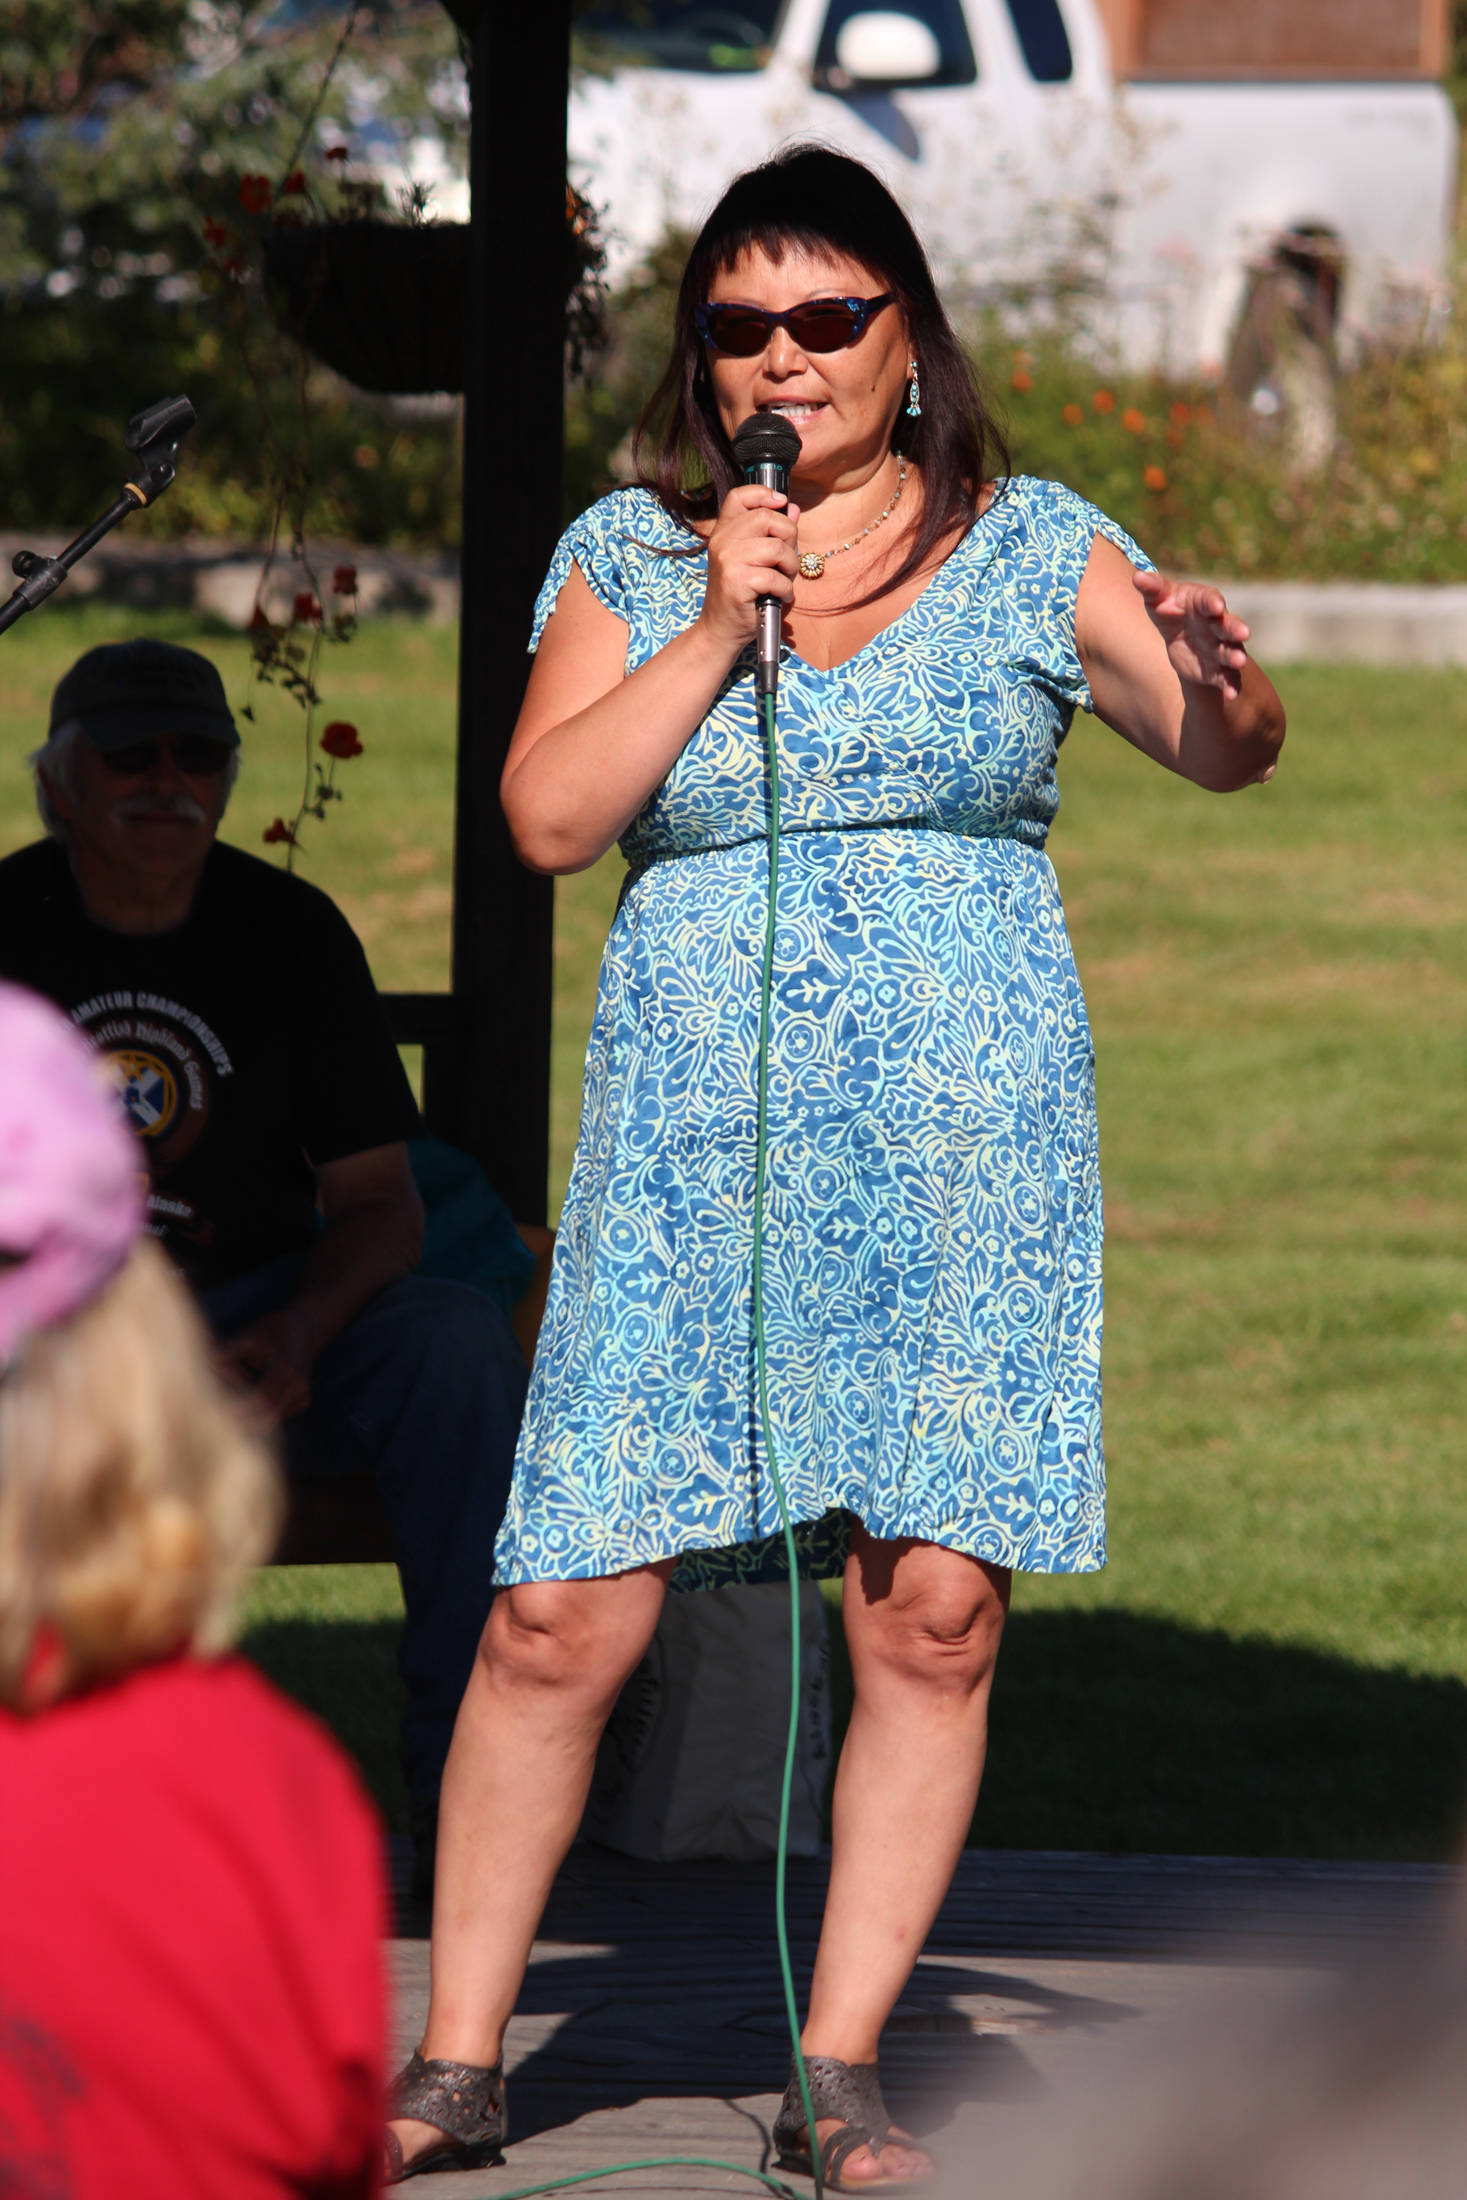 Aleut and Yupik Eskimo Lydia Olympic, who worked with The Wilderness Society as a tribal advocate, gives a speech Saturday, Sept. 8, 2018 at the Rise for Climate, Jobs and Justice rally and march at WKFL Park in Homer, Alaska. The local event, which between 80-90 people attended, was part of a larger movement of rallies held nationally on Sept. 8. (Photo by Megan Pacer/Homer News)